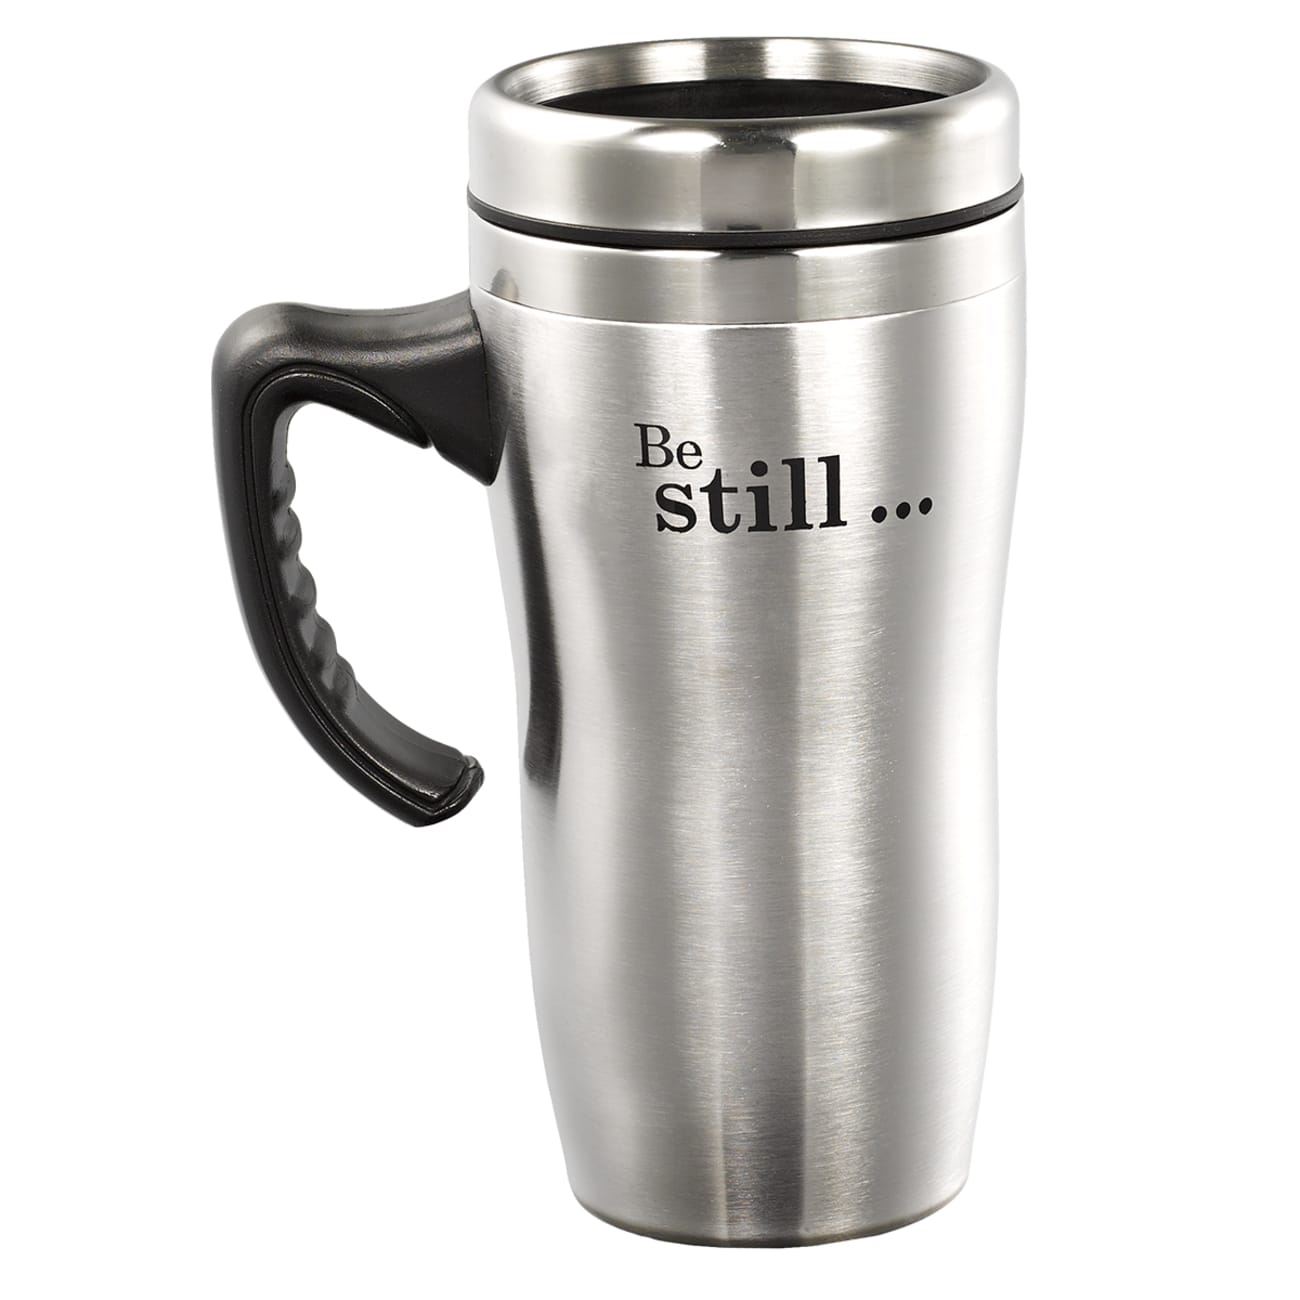 Stainless Steel Travel Mug With Handle: Be Still Homeware